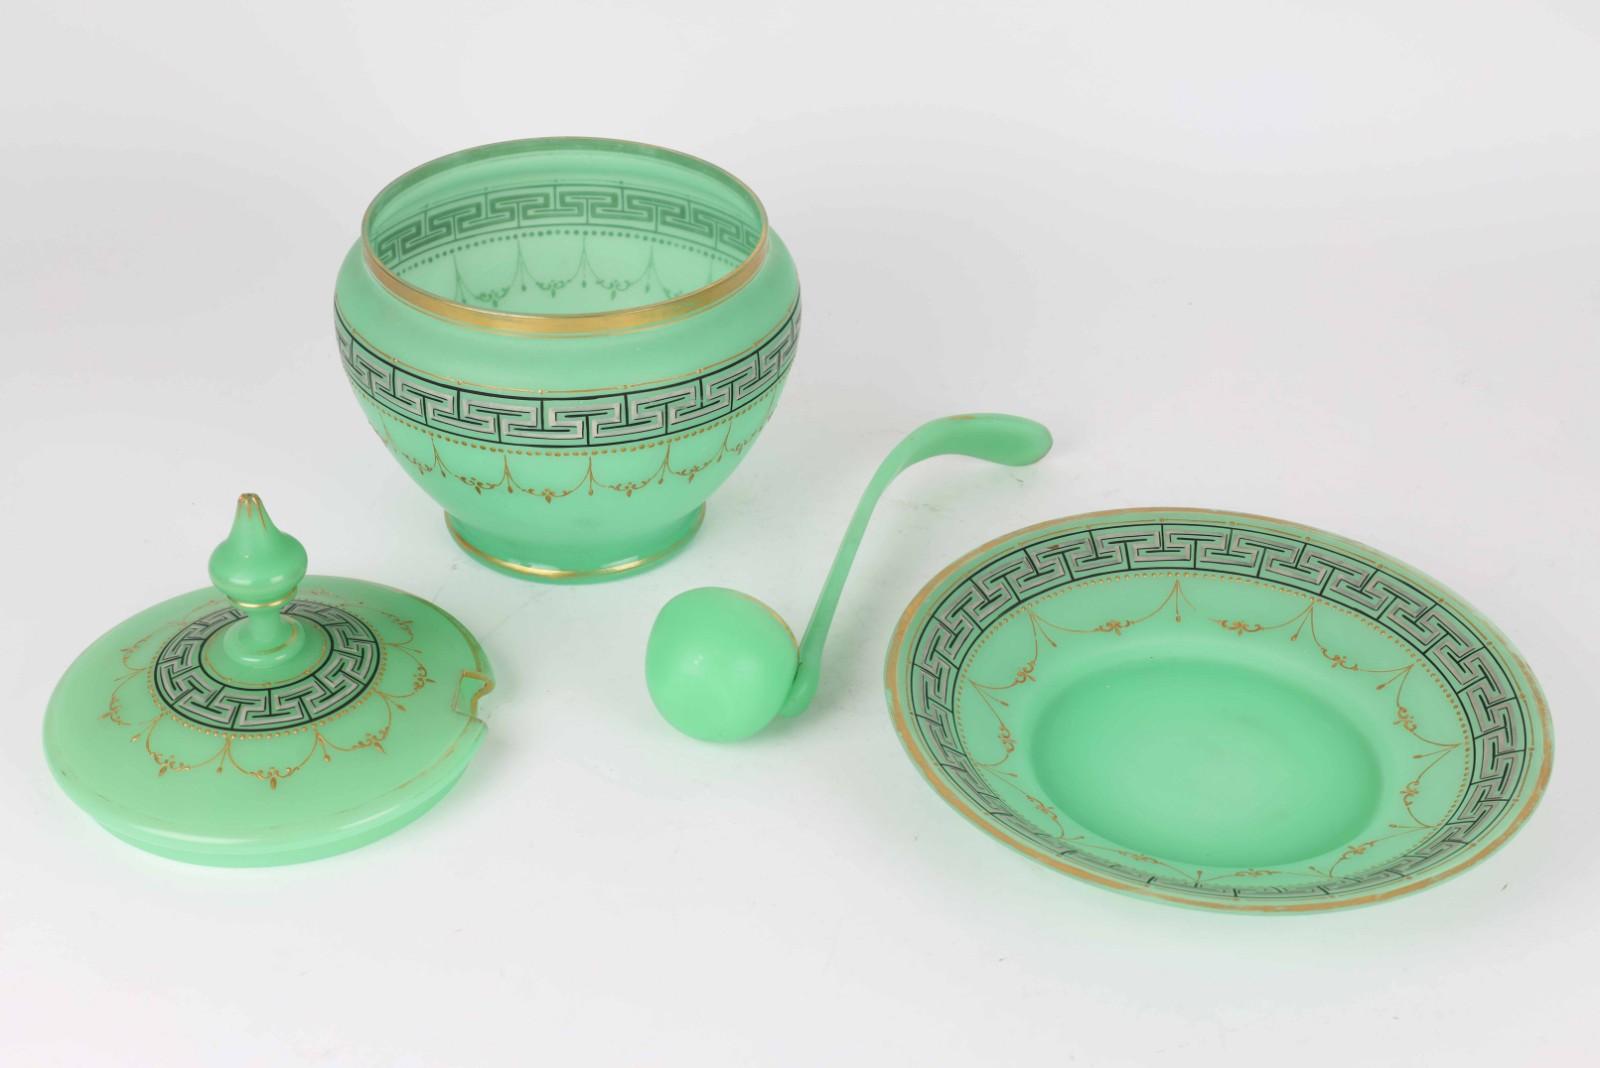 Antique French Baccarat Uranium Green Opaline Glass Punch Bowl Set, 19th Century In Good Condition For Sale In Rostock, MV